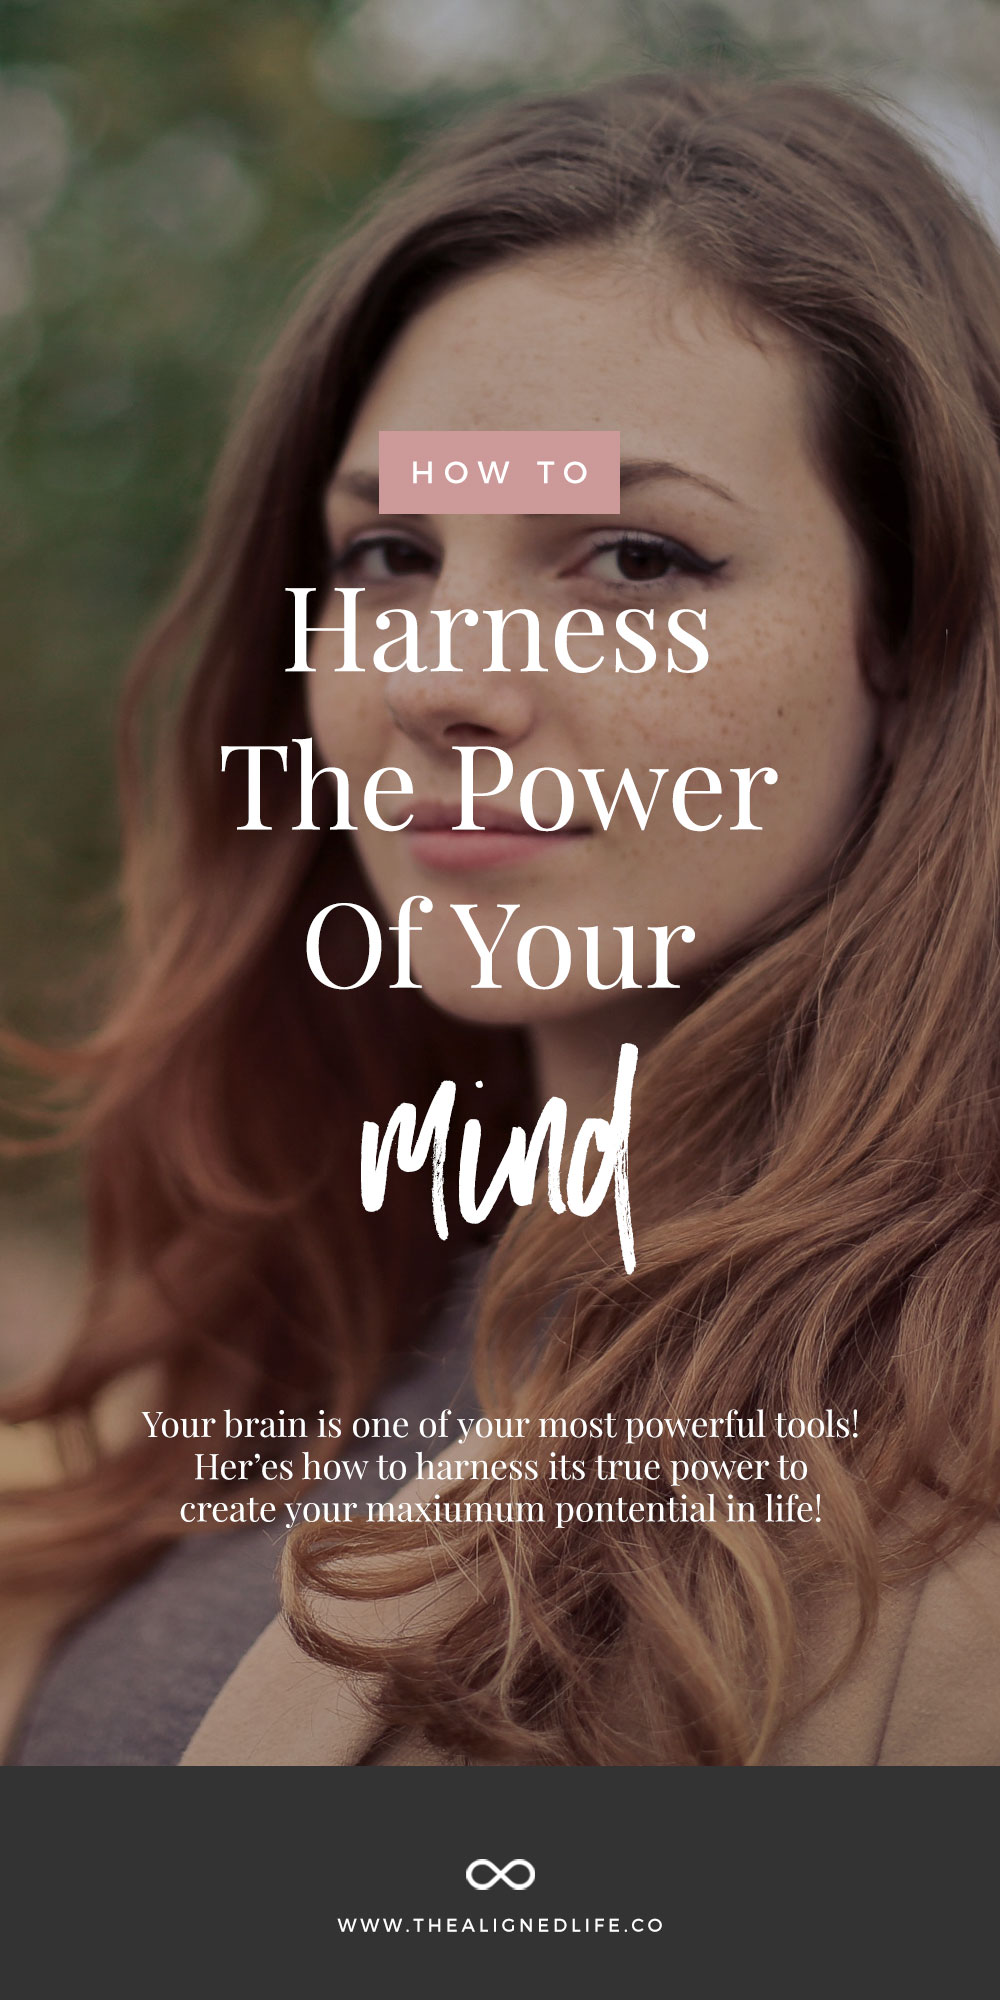 Harness The Power Of Your Mind For Good (& Not Evil!)